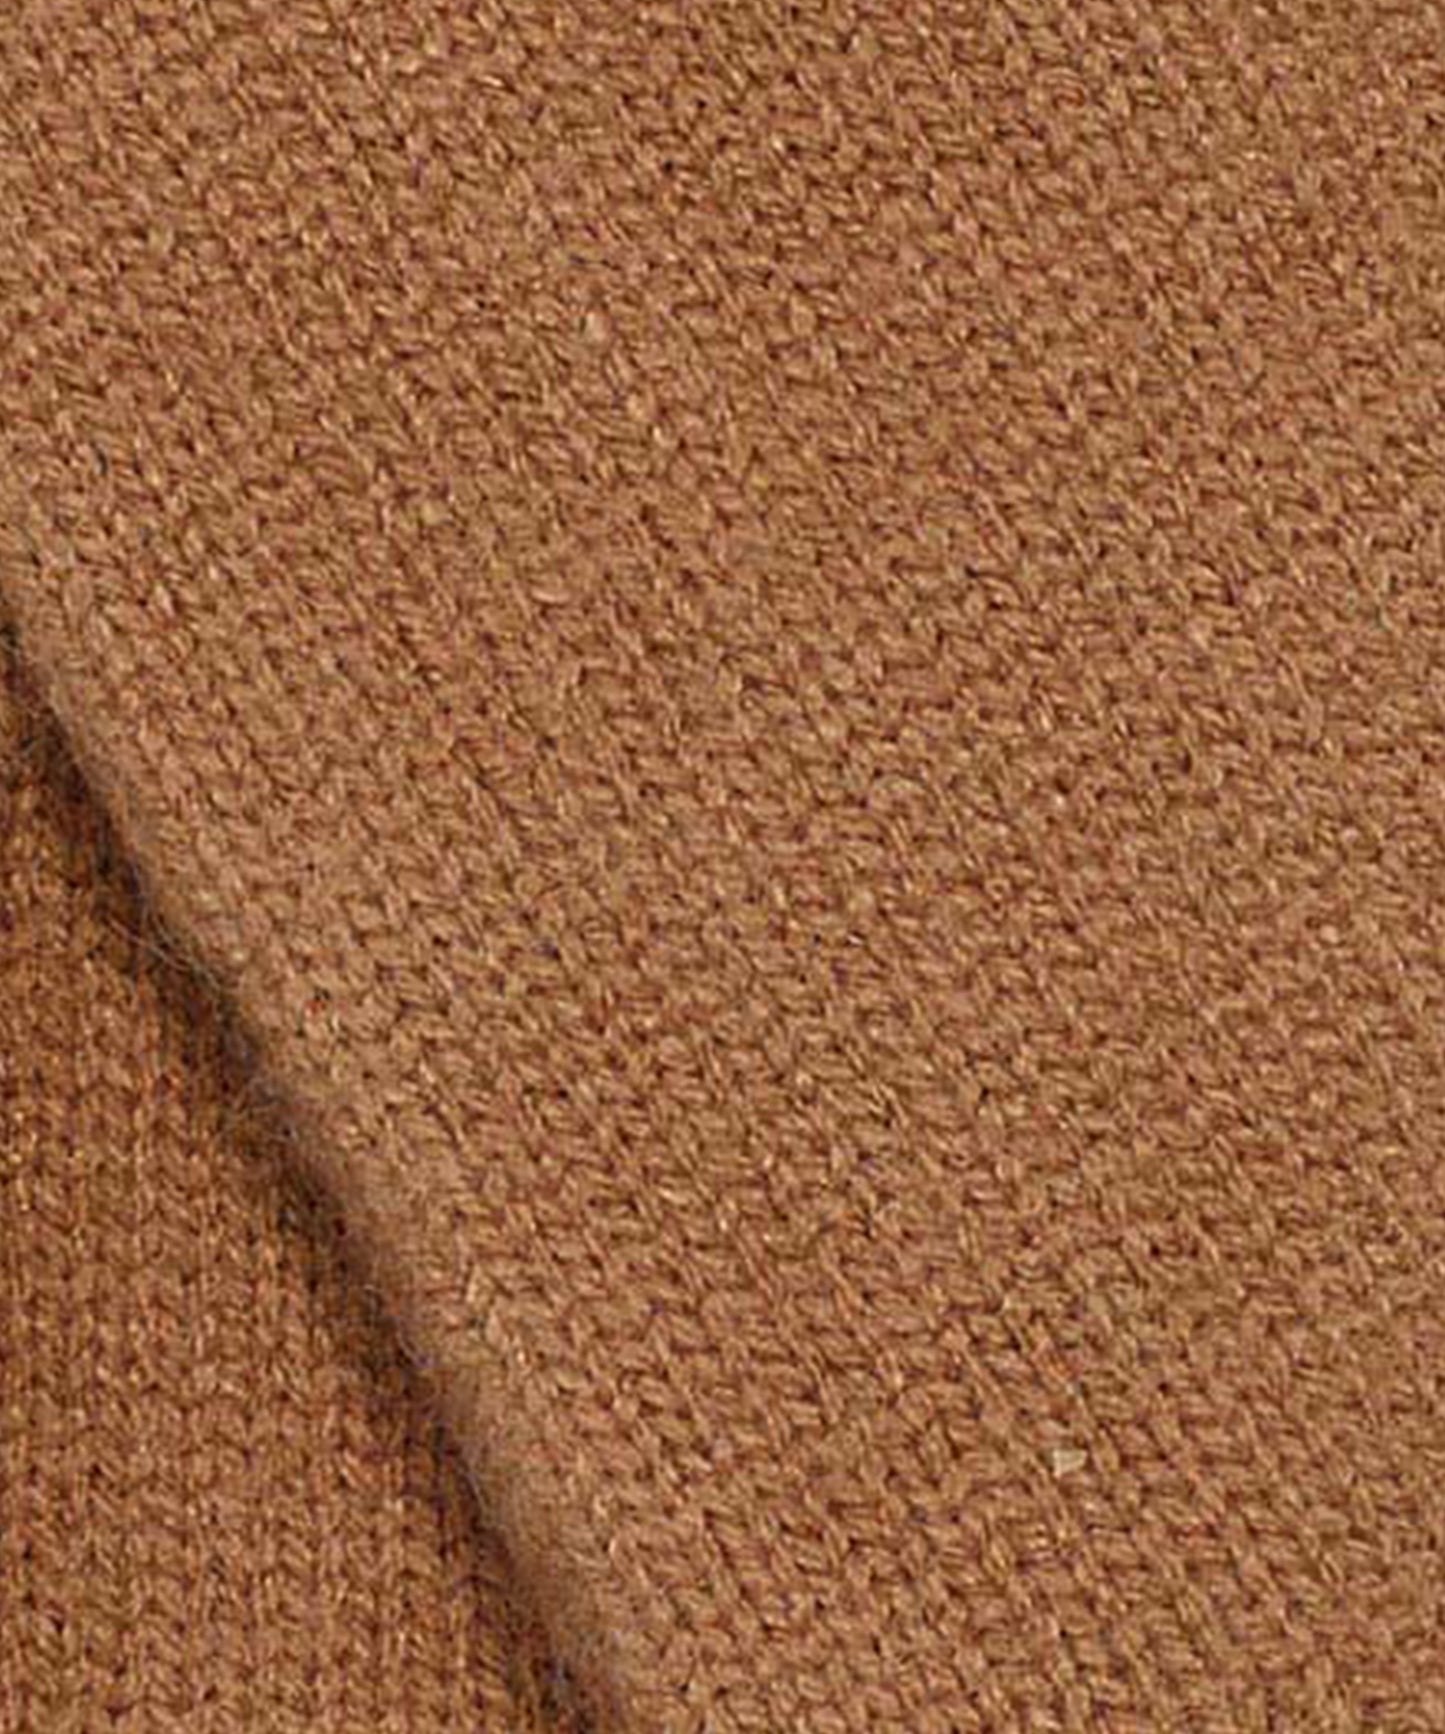 Echo Knit Touch Glove in color Camel